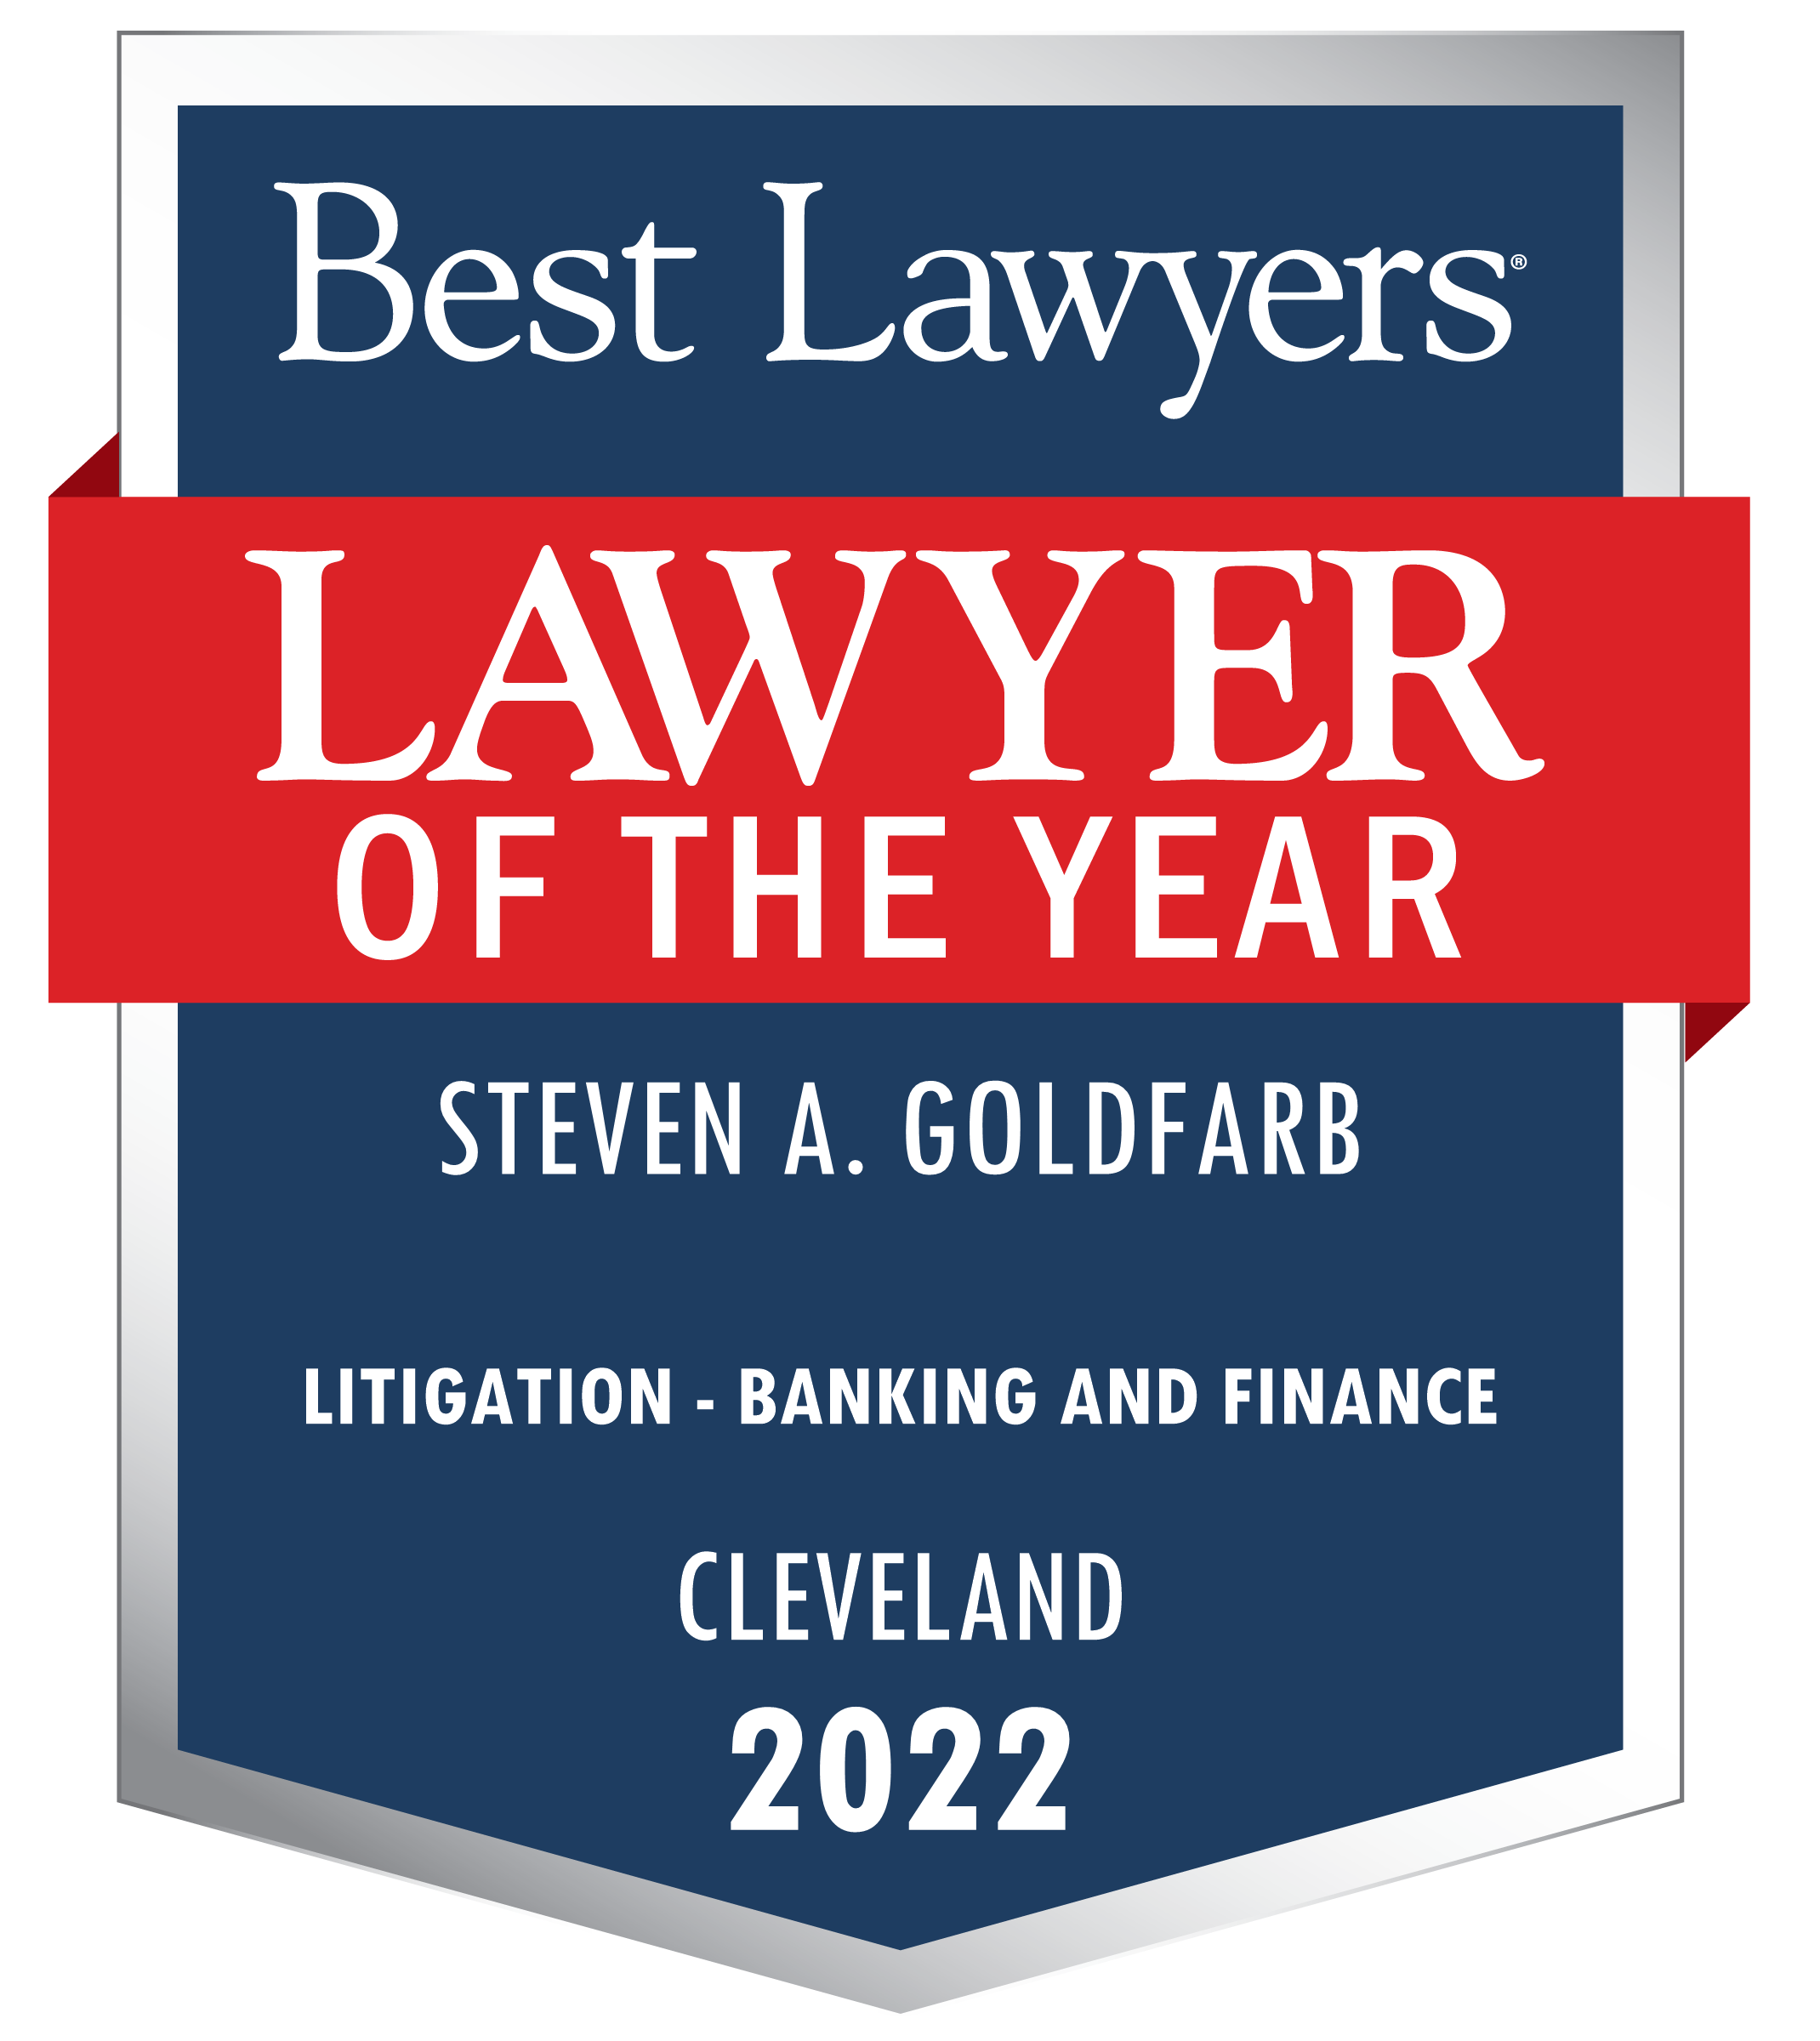 Best Lawyers Lawyer of the year steven a goldfarb Litigation banking and Finance Attorney